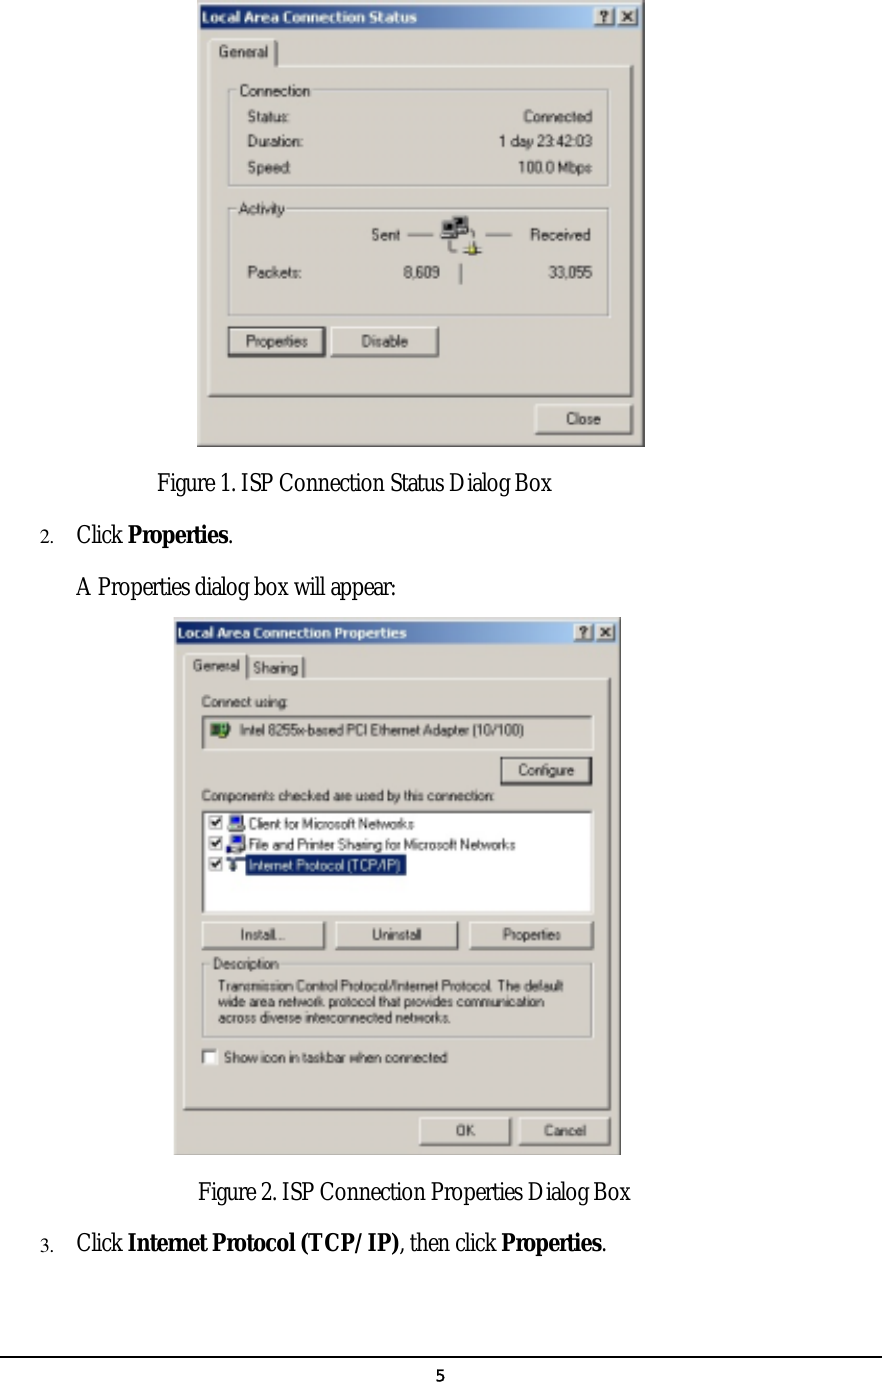   5 Figure 1. ISP Connection Status Dialog Box 2.  Click Properties.    A Properties dialog box will appear:   Figure 2. ISP Connection Properties Dialog Box 3.  Click Internet Protocol (TCP/IP), then click Properties. 